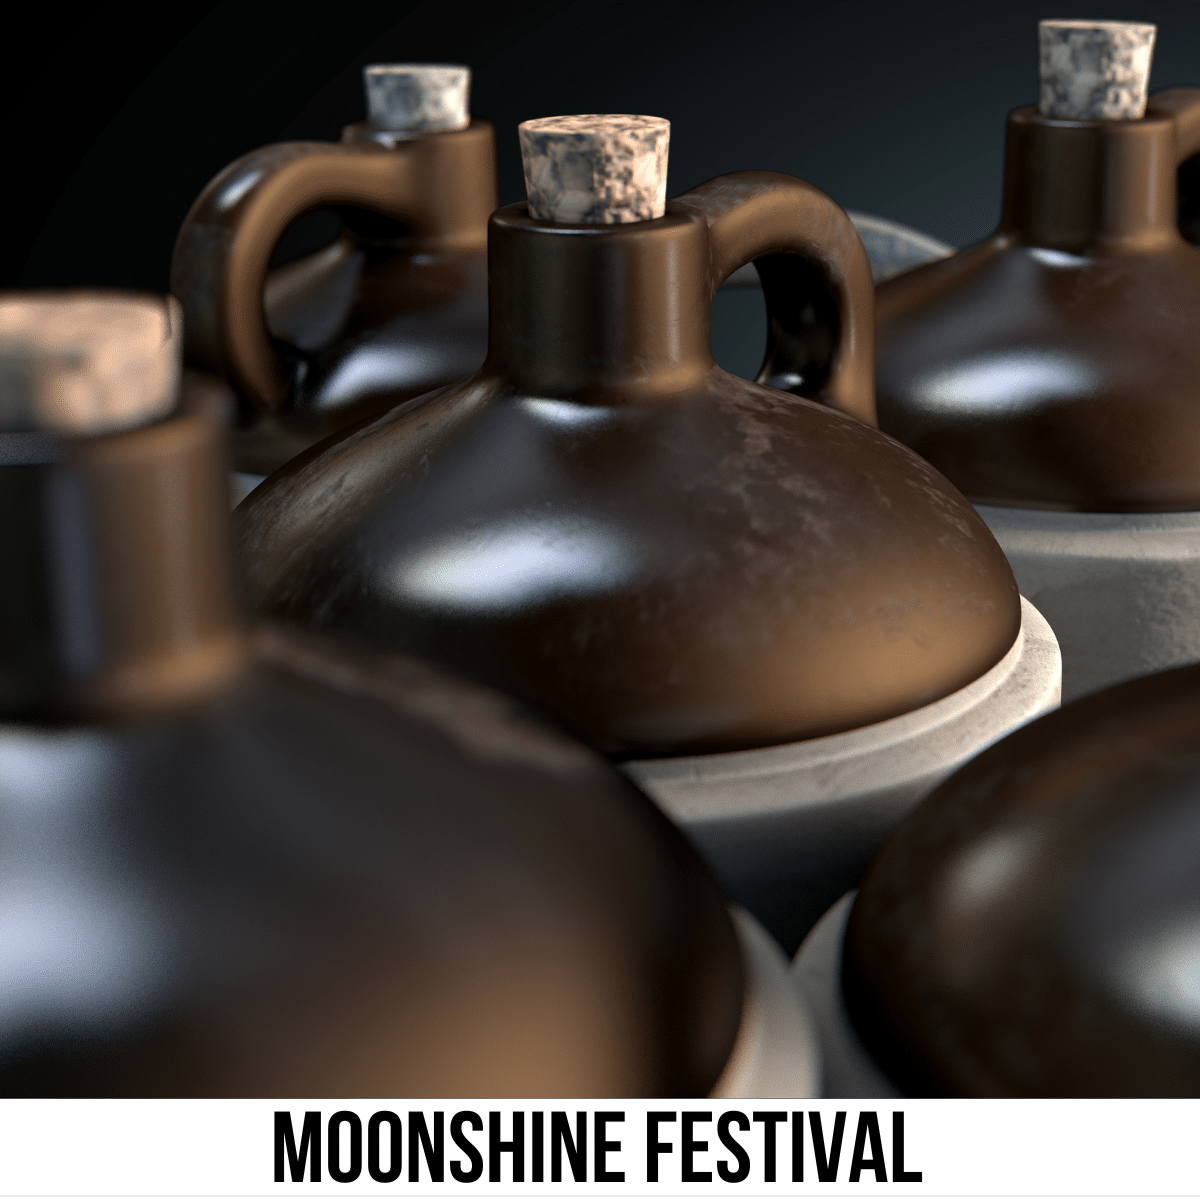 A square image of a photo of several brown jugs with corks. A white strip across the bottom has text Moonshine Festival